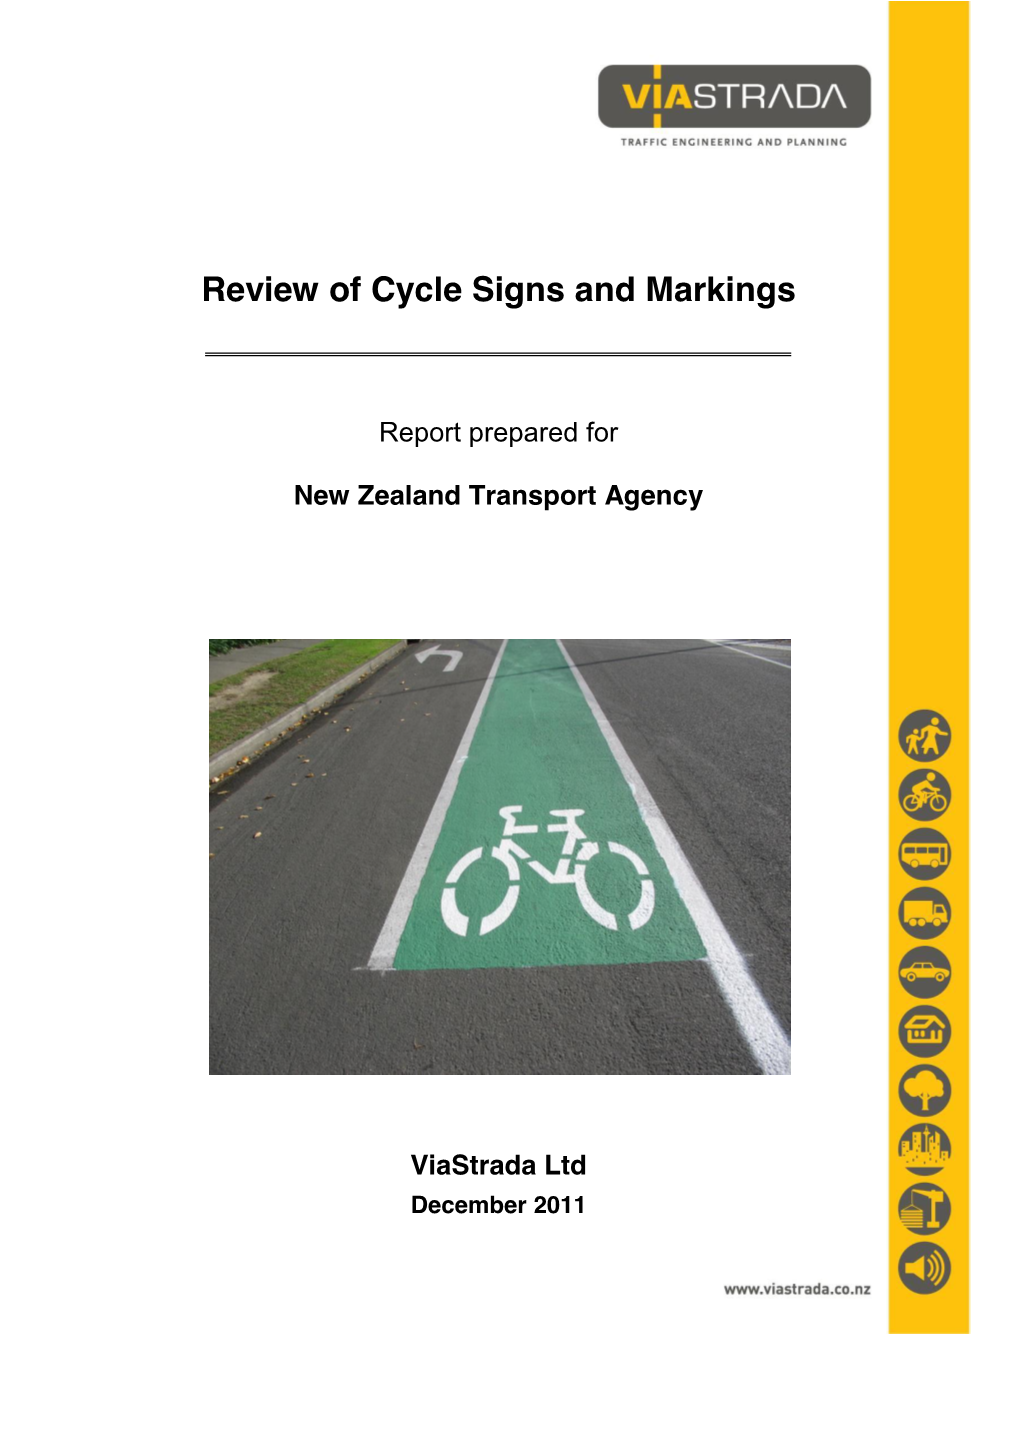 Review of Cycle Signs and Markings